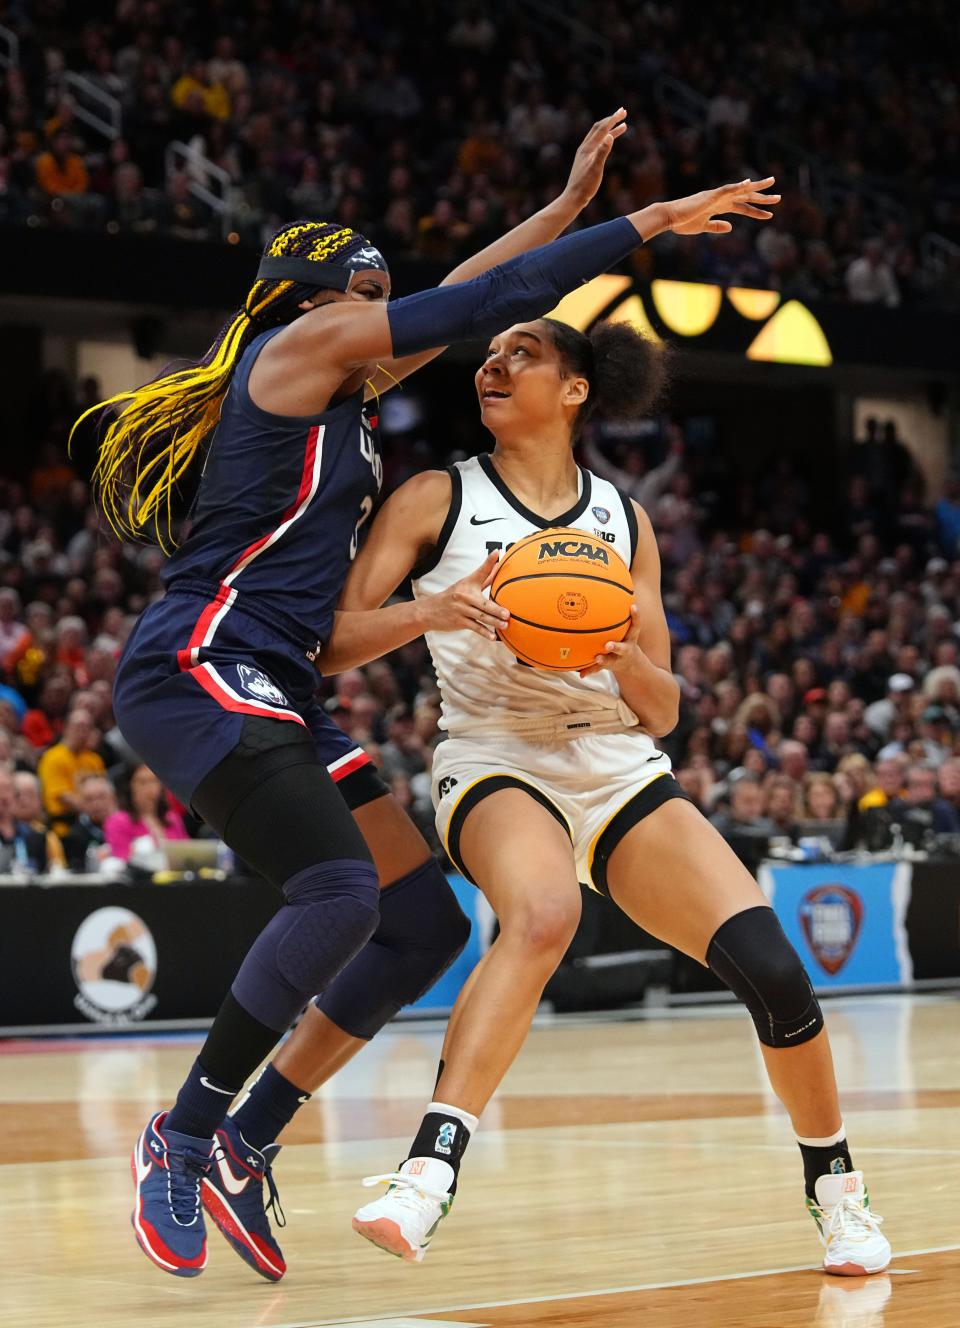 Iowa's Hannah Stuelke (45) drives to the basket as UConn's Aaliyah Edwards (3) defends during semifinals of the NCAA Women's Basketball Tournament on Friday in Cleveland.